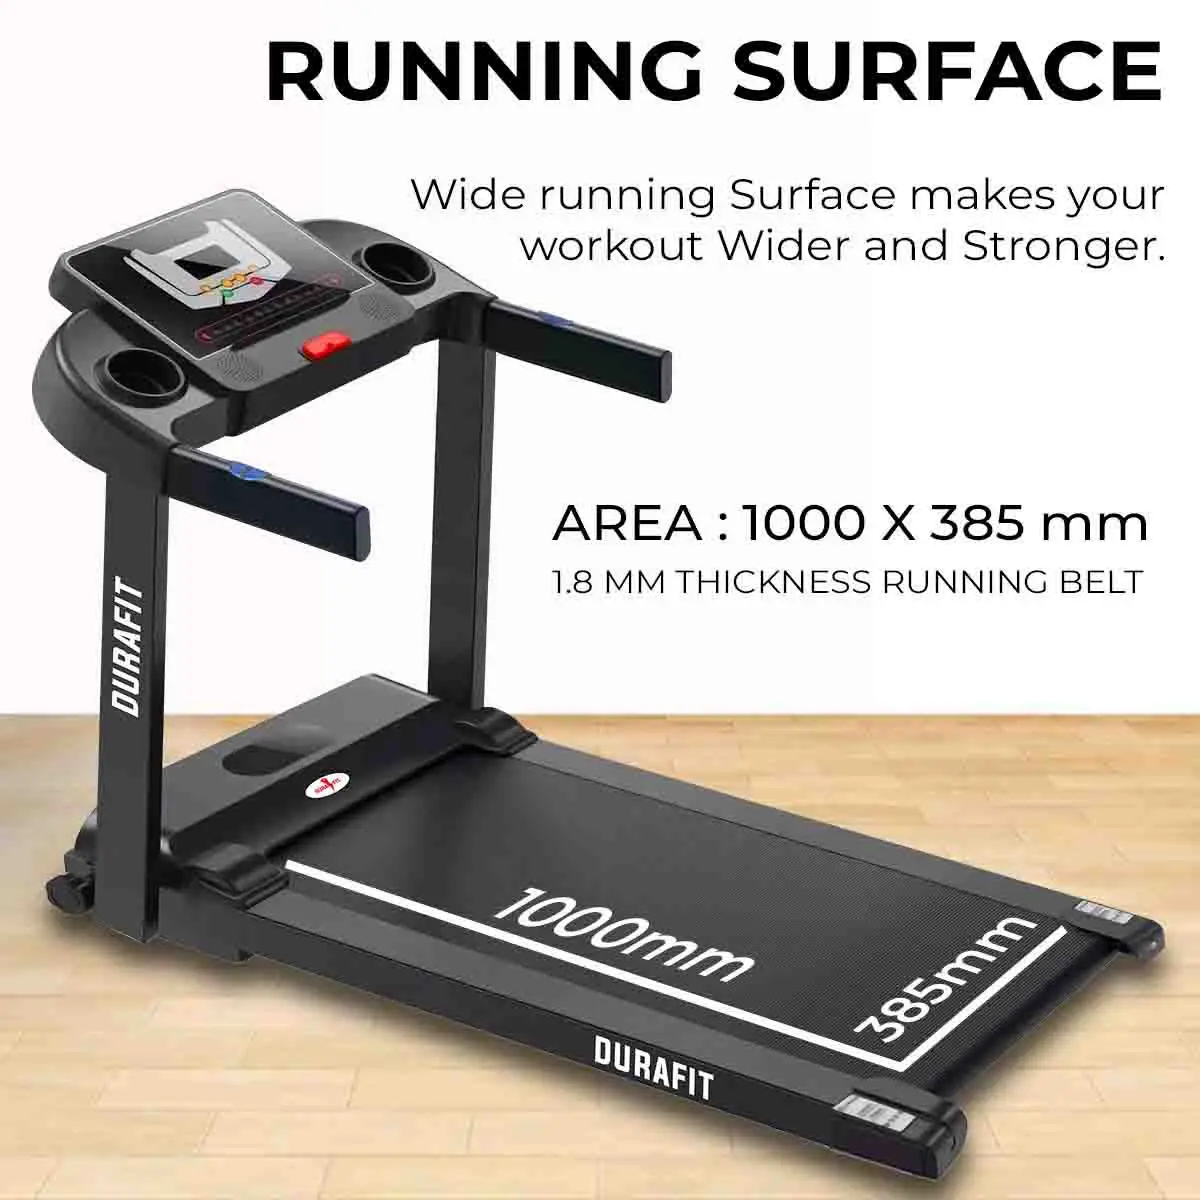 Durafit Spark Treadmill with Wide Running Surface